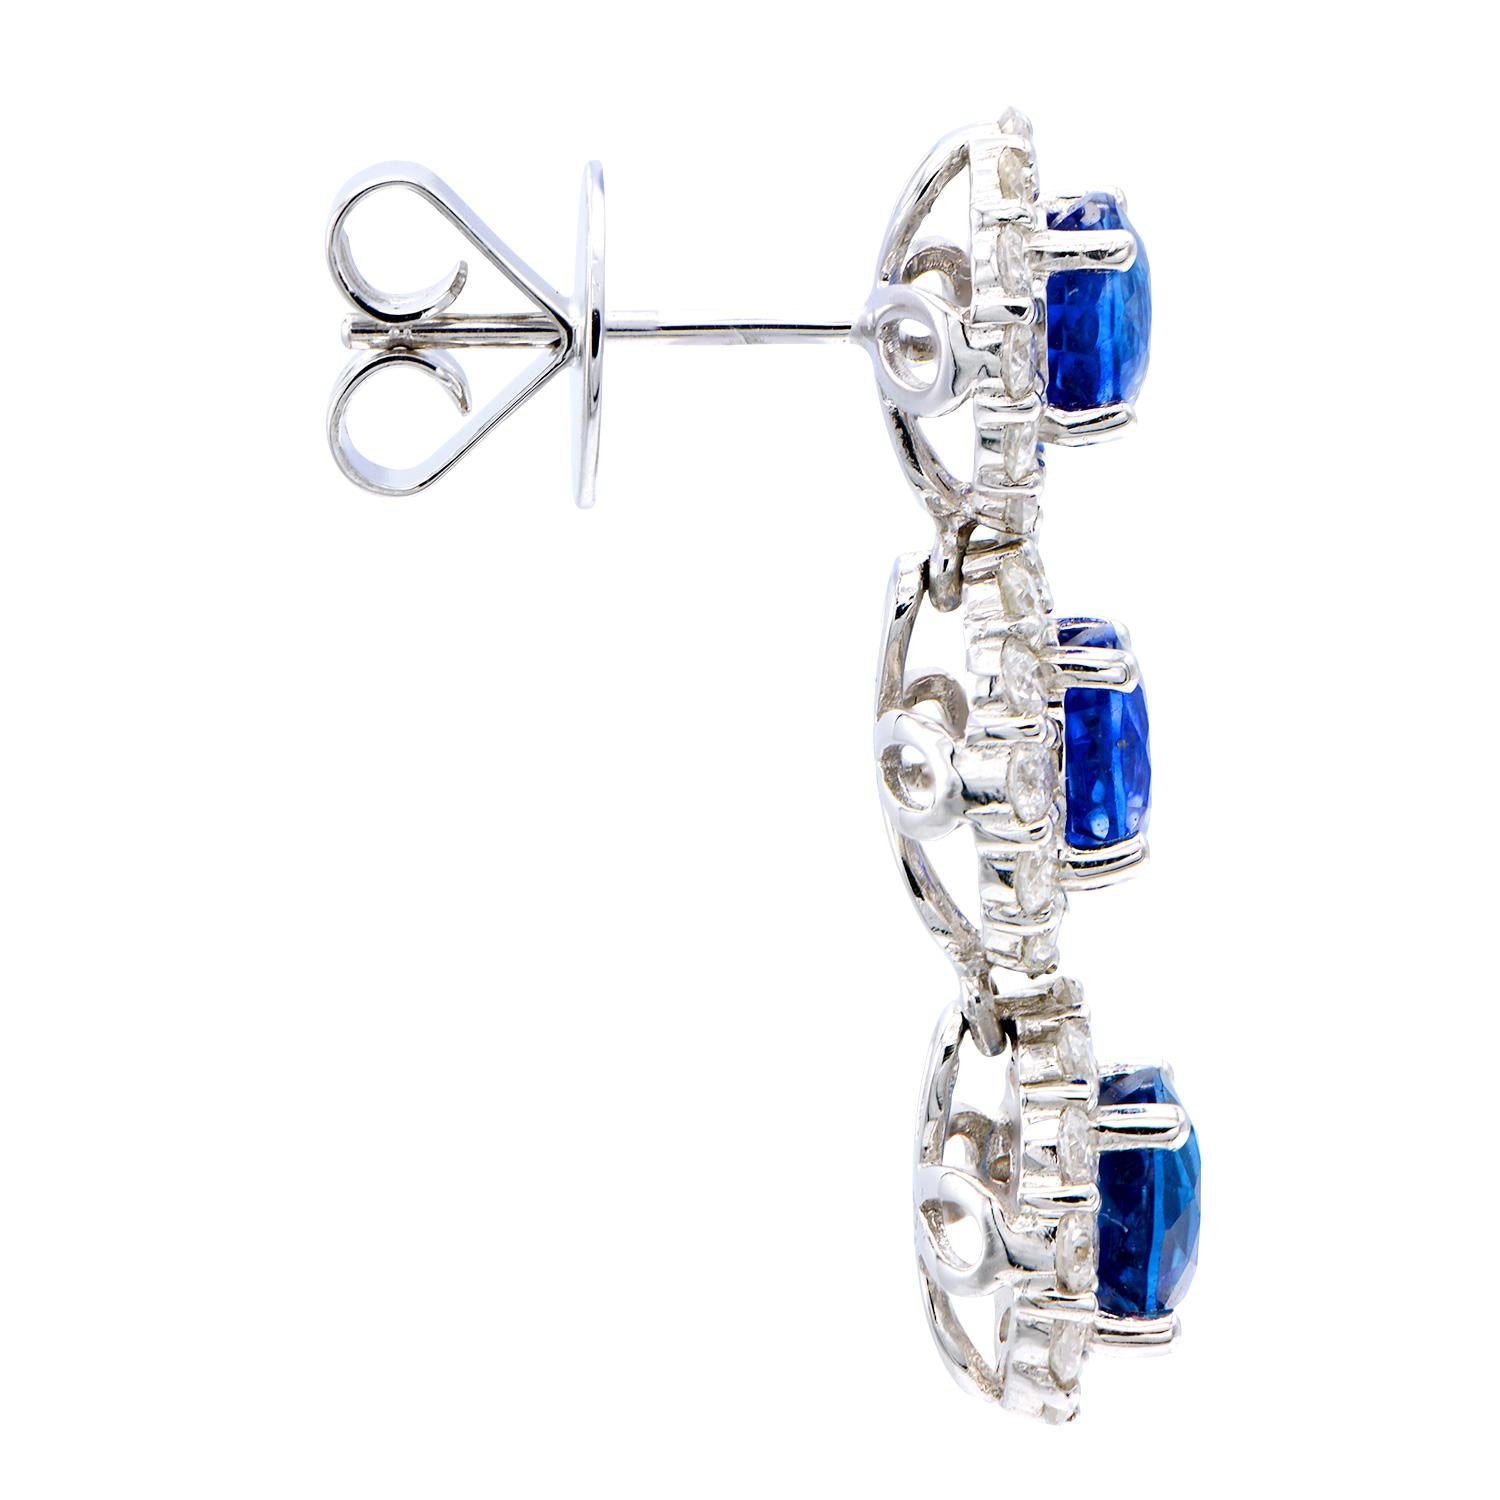 These stunning earrings are made of 6 royal blue sapphires totalling 4.46 carats which are surrounded by 72 round VS2, G color diamonds totaling 1.75 carats of shine. They are set in 5.2 grams of 18 karat white gold and have a post with a push back